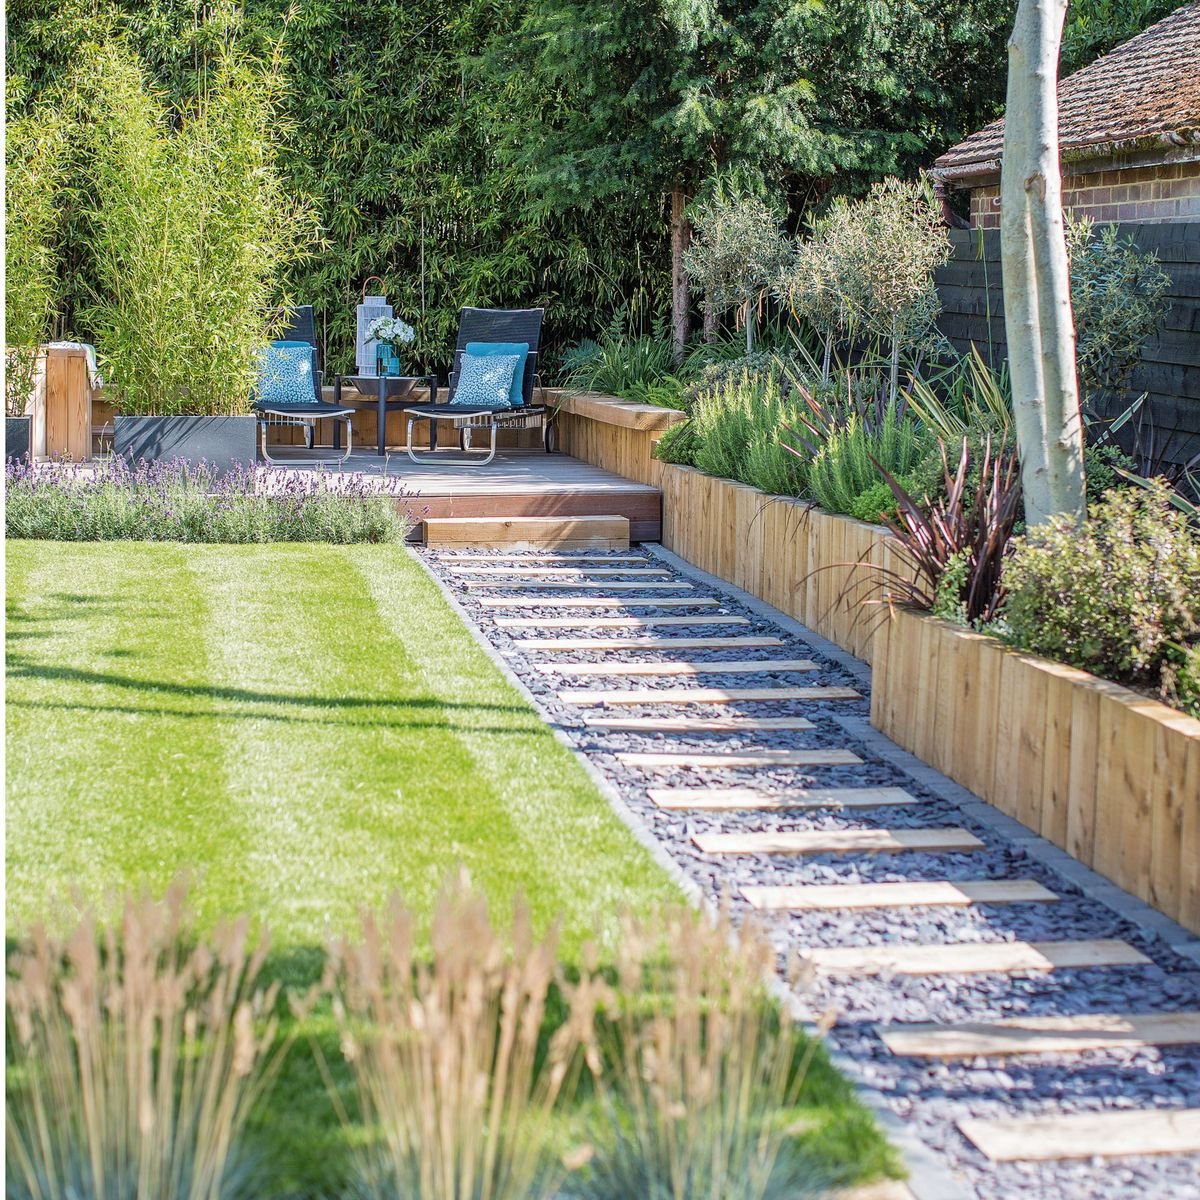 22 Garden edging ideas that will add a polished finish to your garden